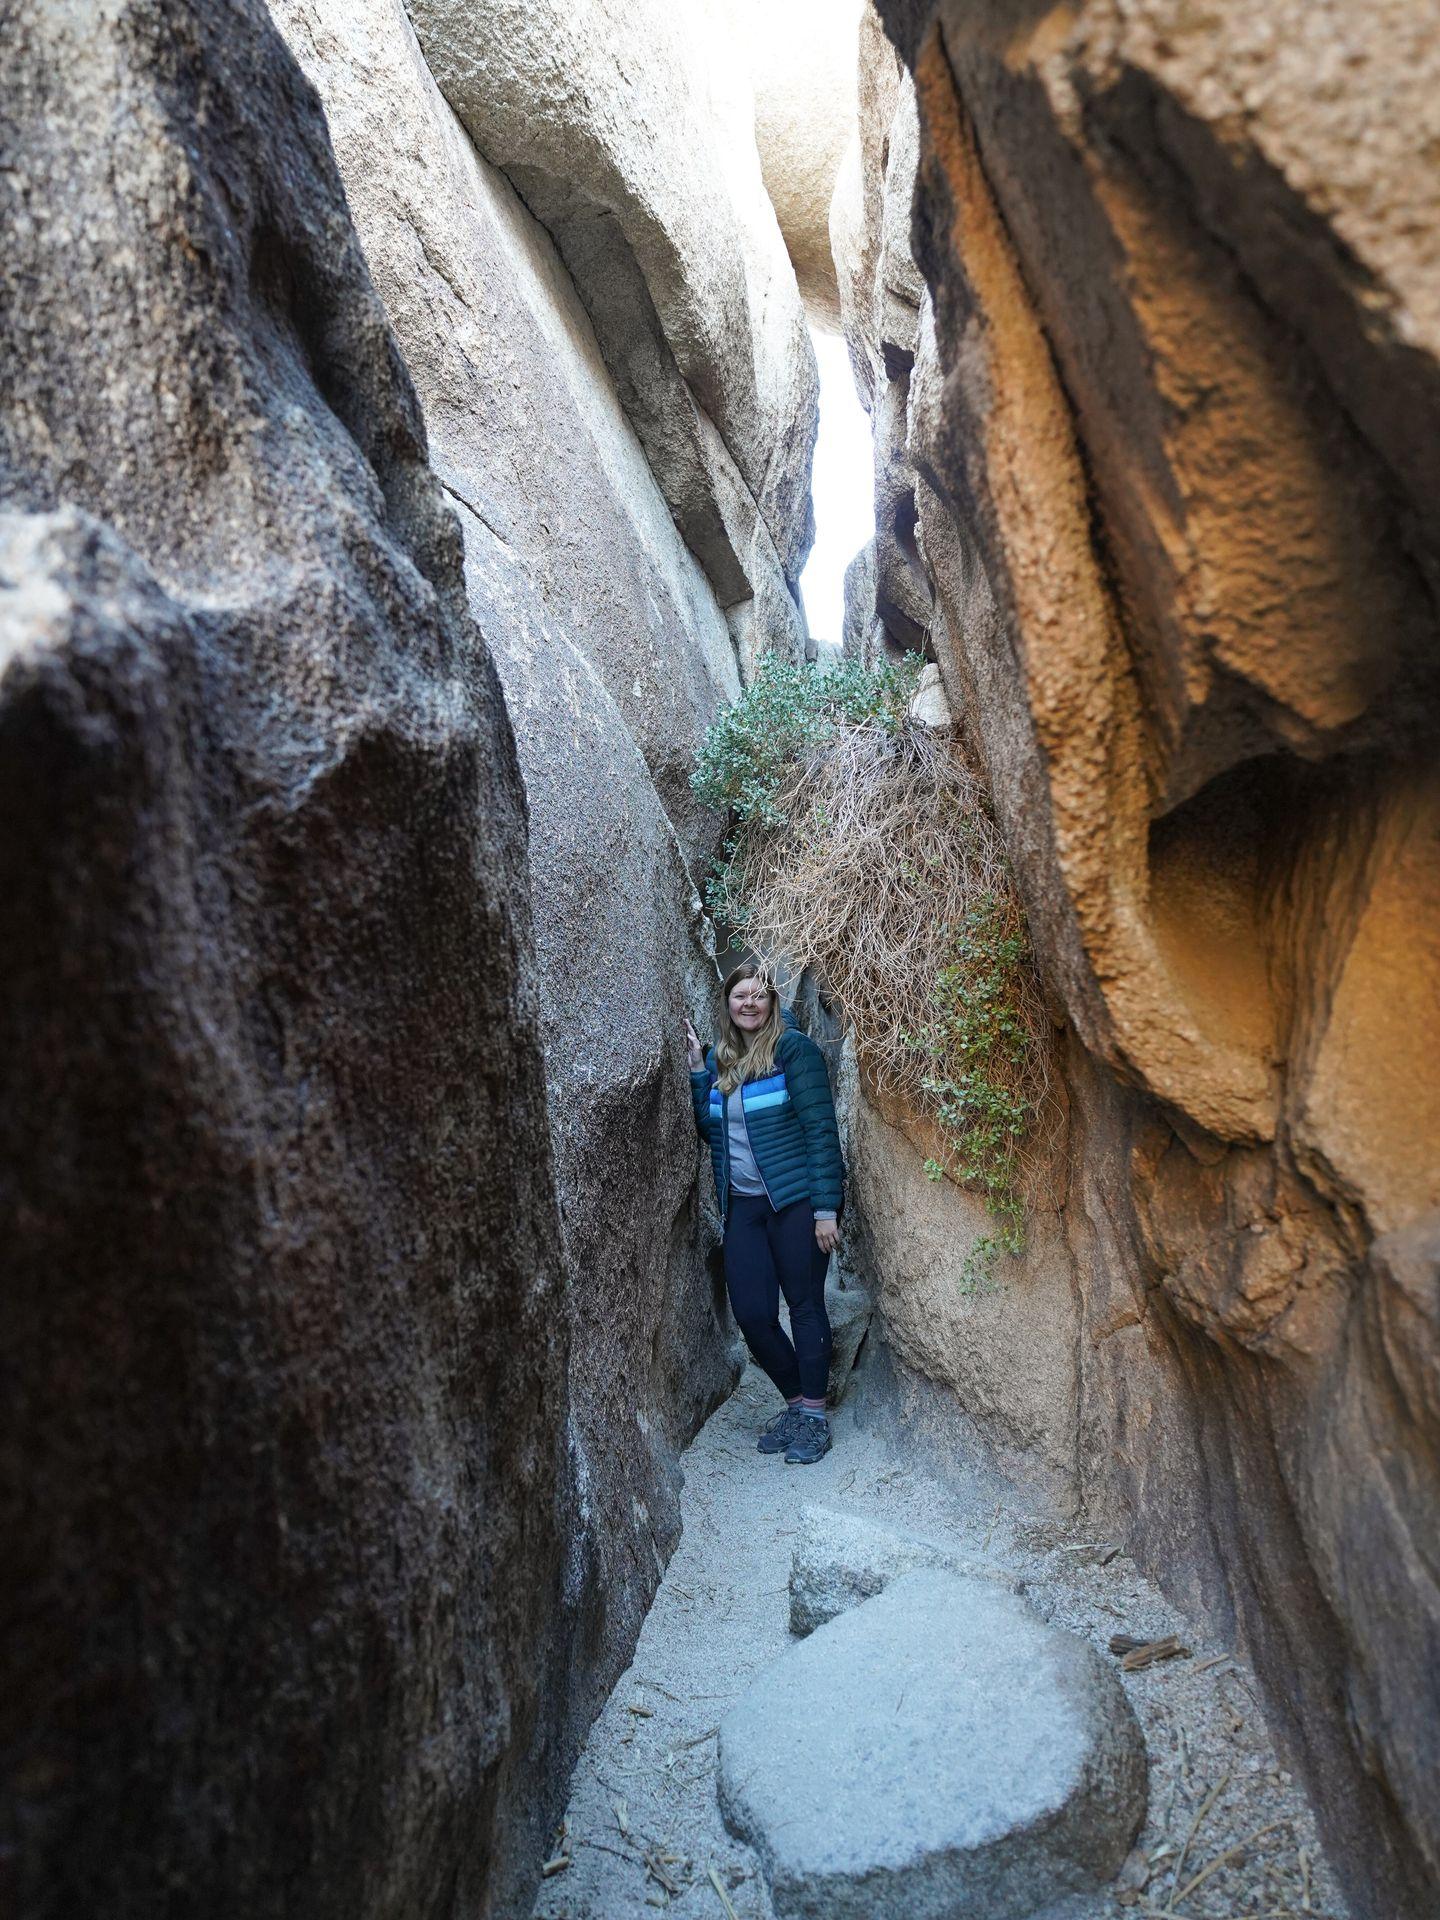 Lydia standing inside of a narrow slot canyon and leaning against one side.